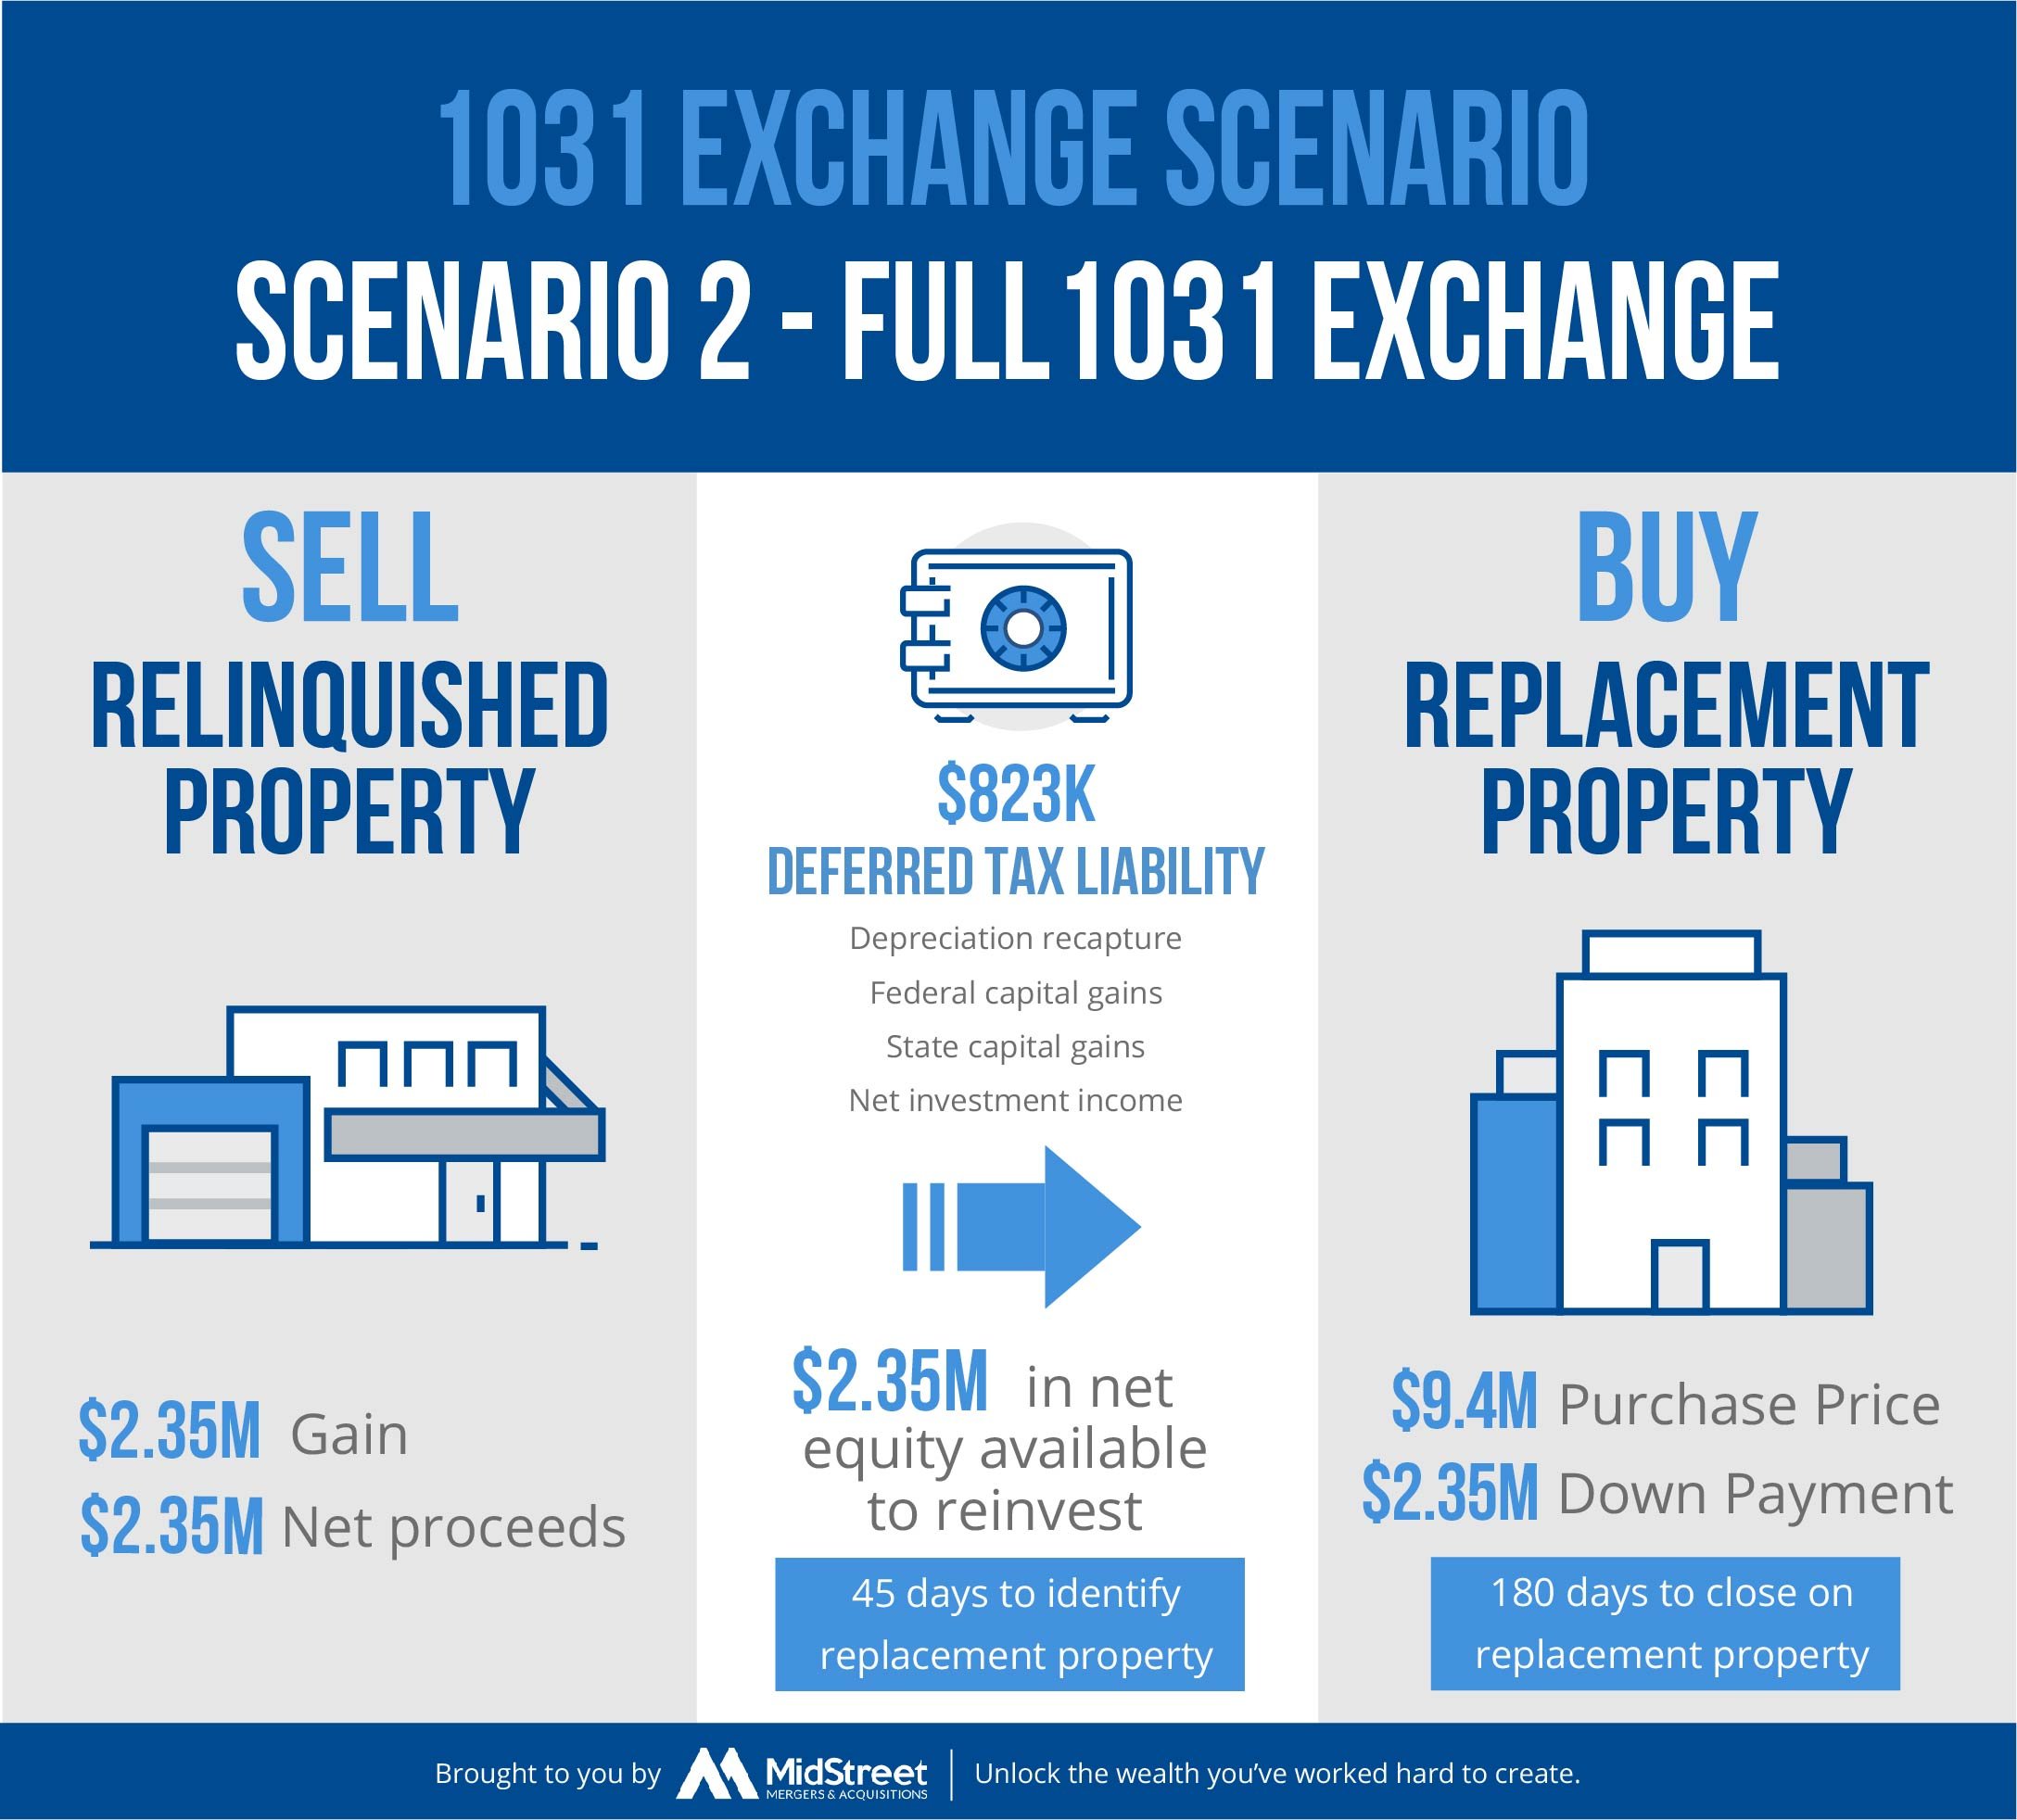 1031 Exchange When Selling a Business